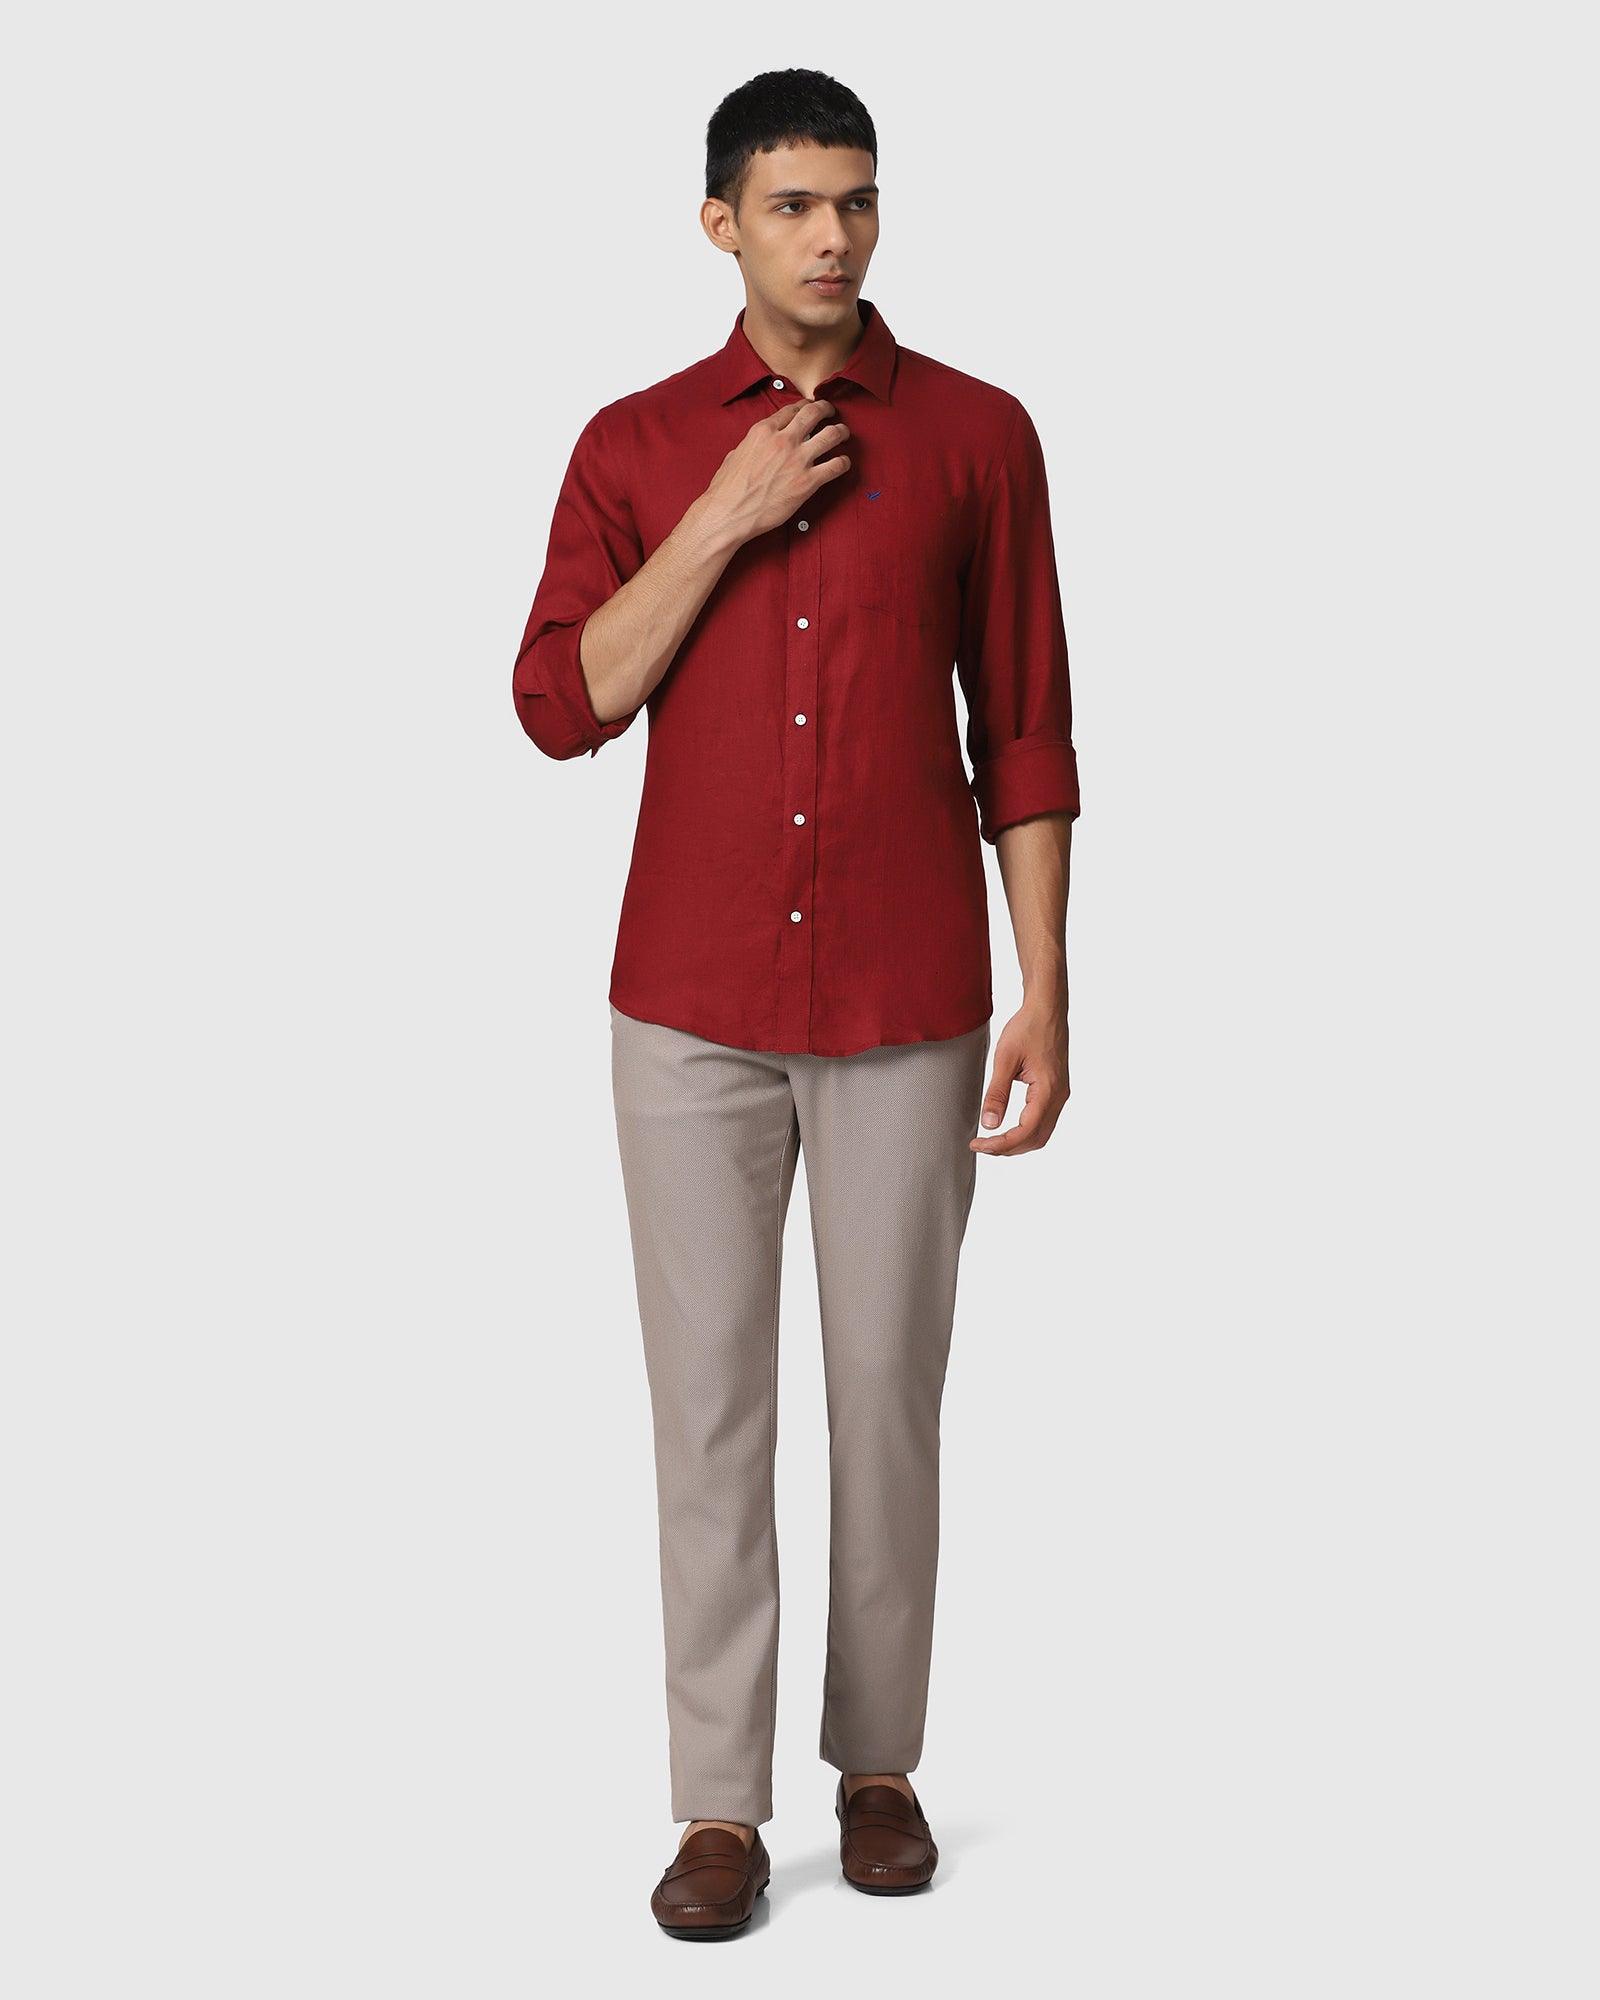 Ruby Red Linen Shirt with Black Contrast Detailing on Neck, Sleeves & –  archerslounge